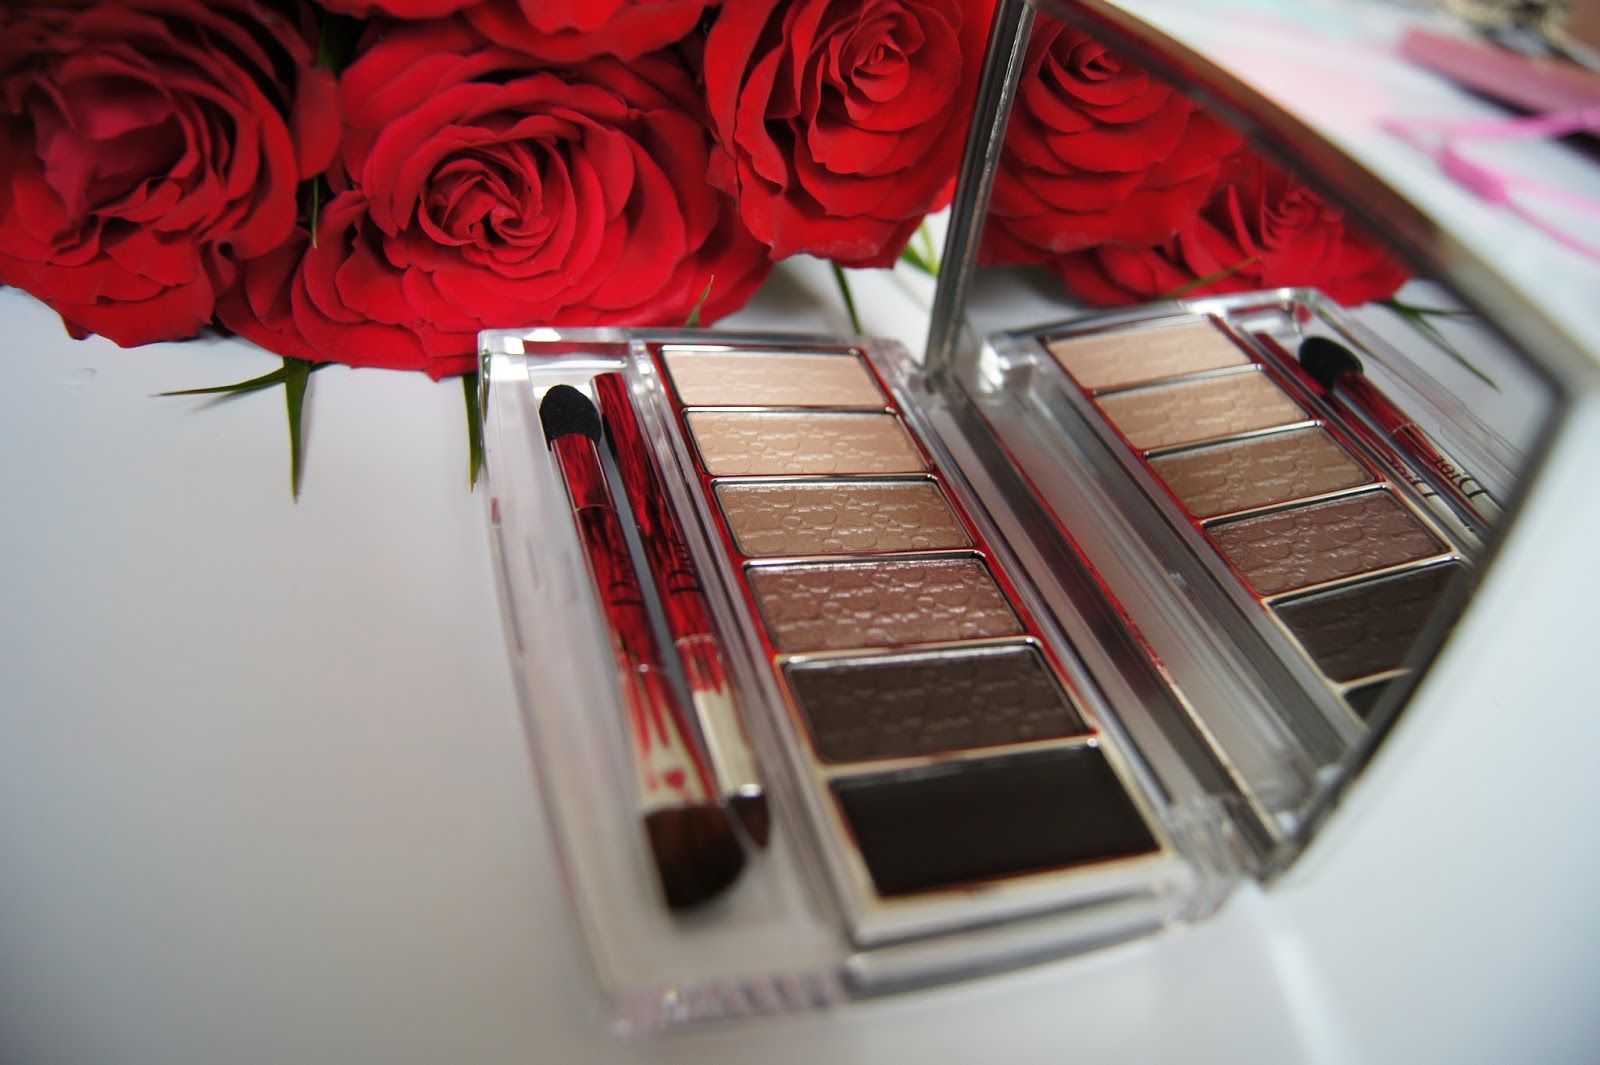 Dior Eye Reviver Eyeshadow Palette review